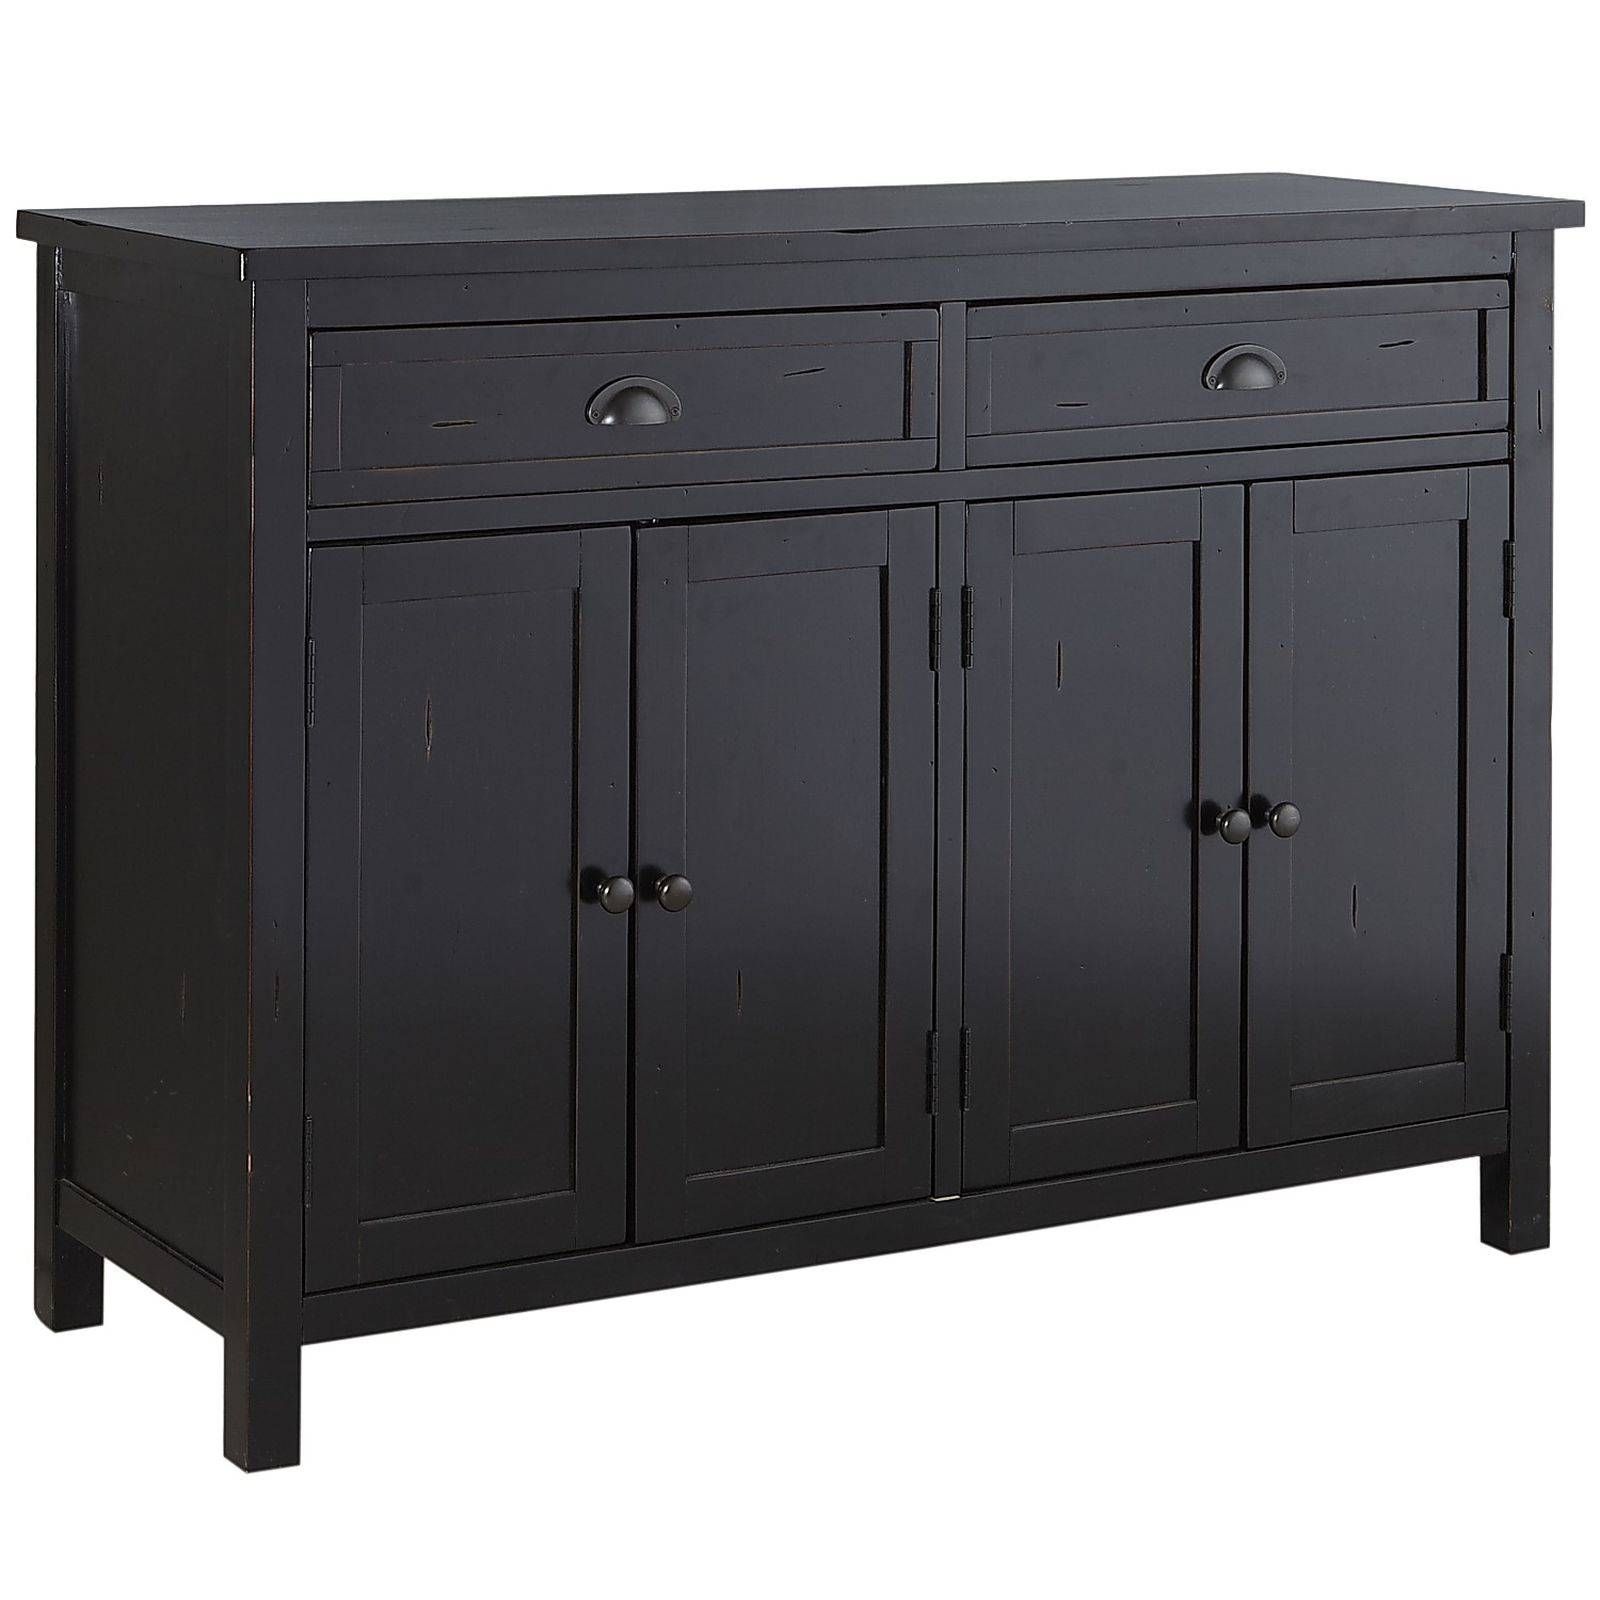 Sideboards: Appealing Maple Buffet Table Buffet Hutch, Antique Throughout Most Up To Date Black Buffet Sideboards (View 11 of 15)